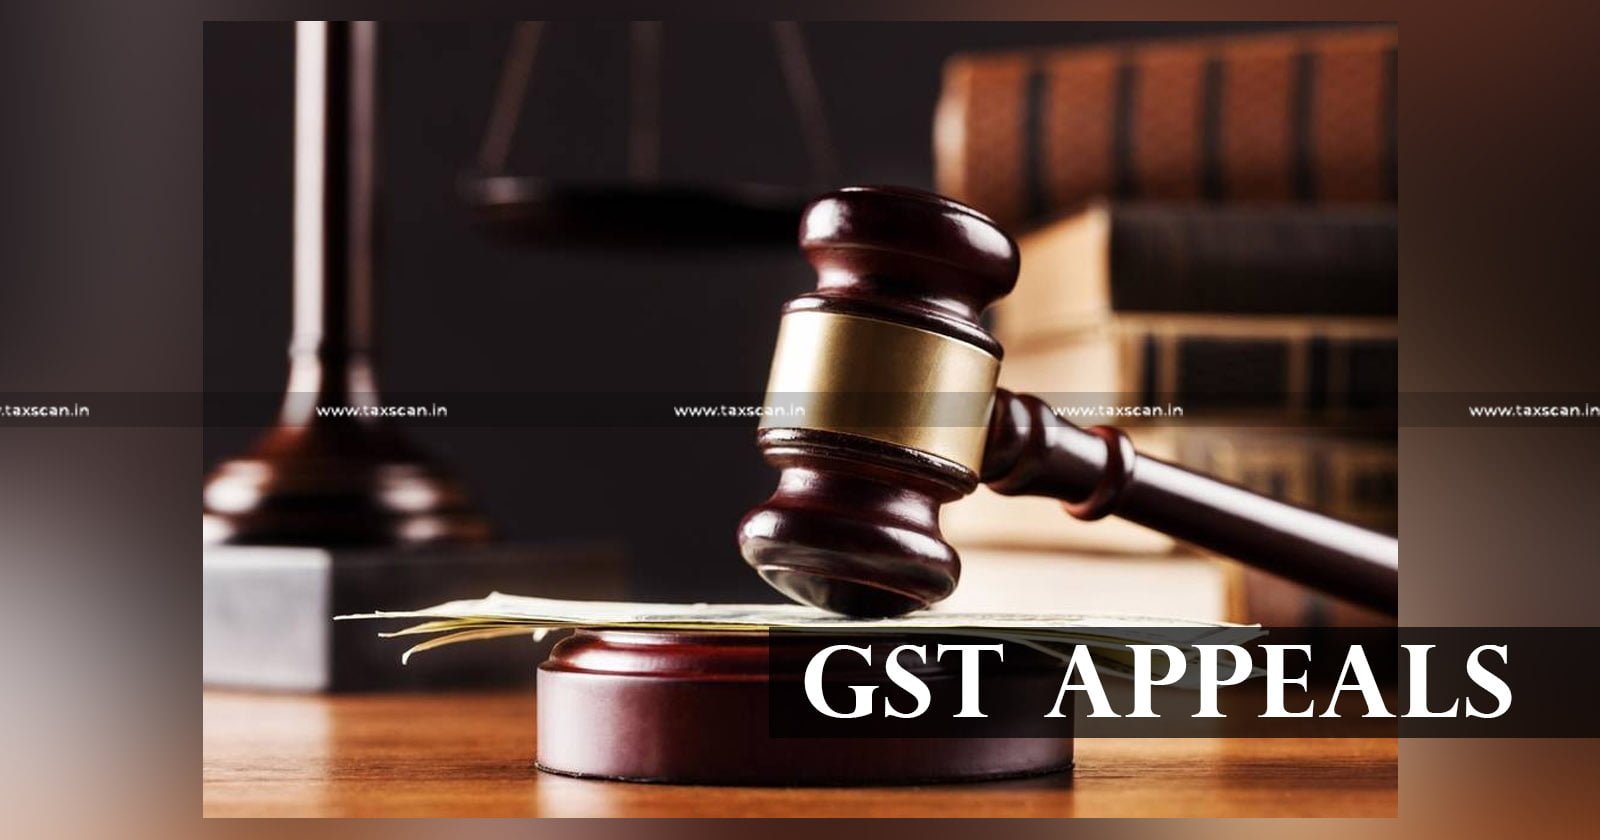 Appellate Authority shall Consider GST Appeal - Reference to Statutory Compliance - Madras HC - TAXSCAN